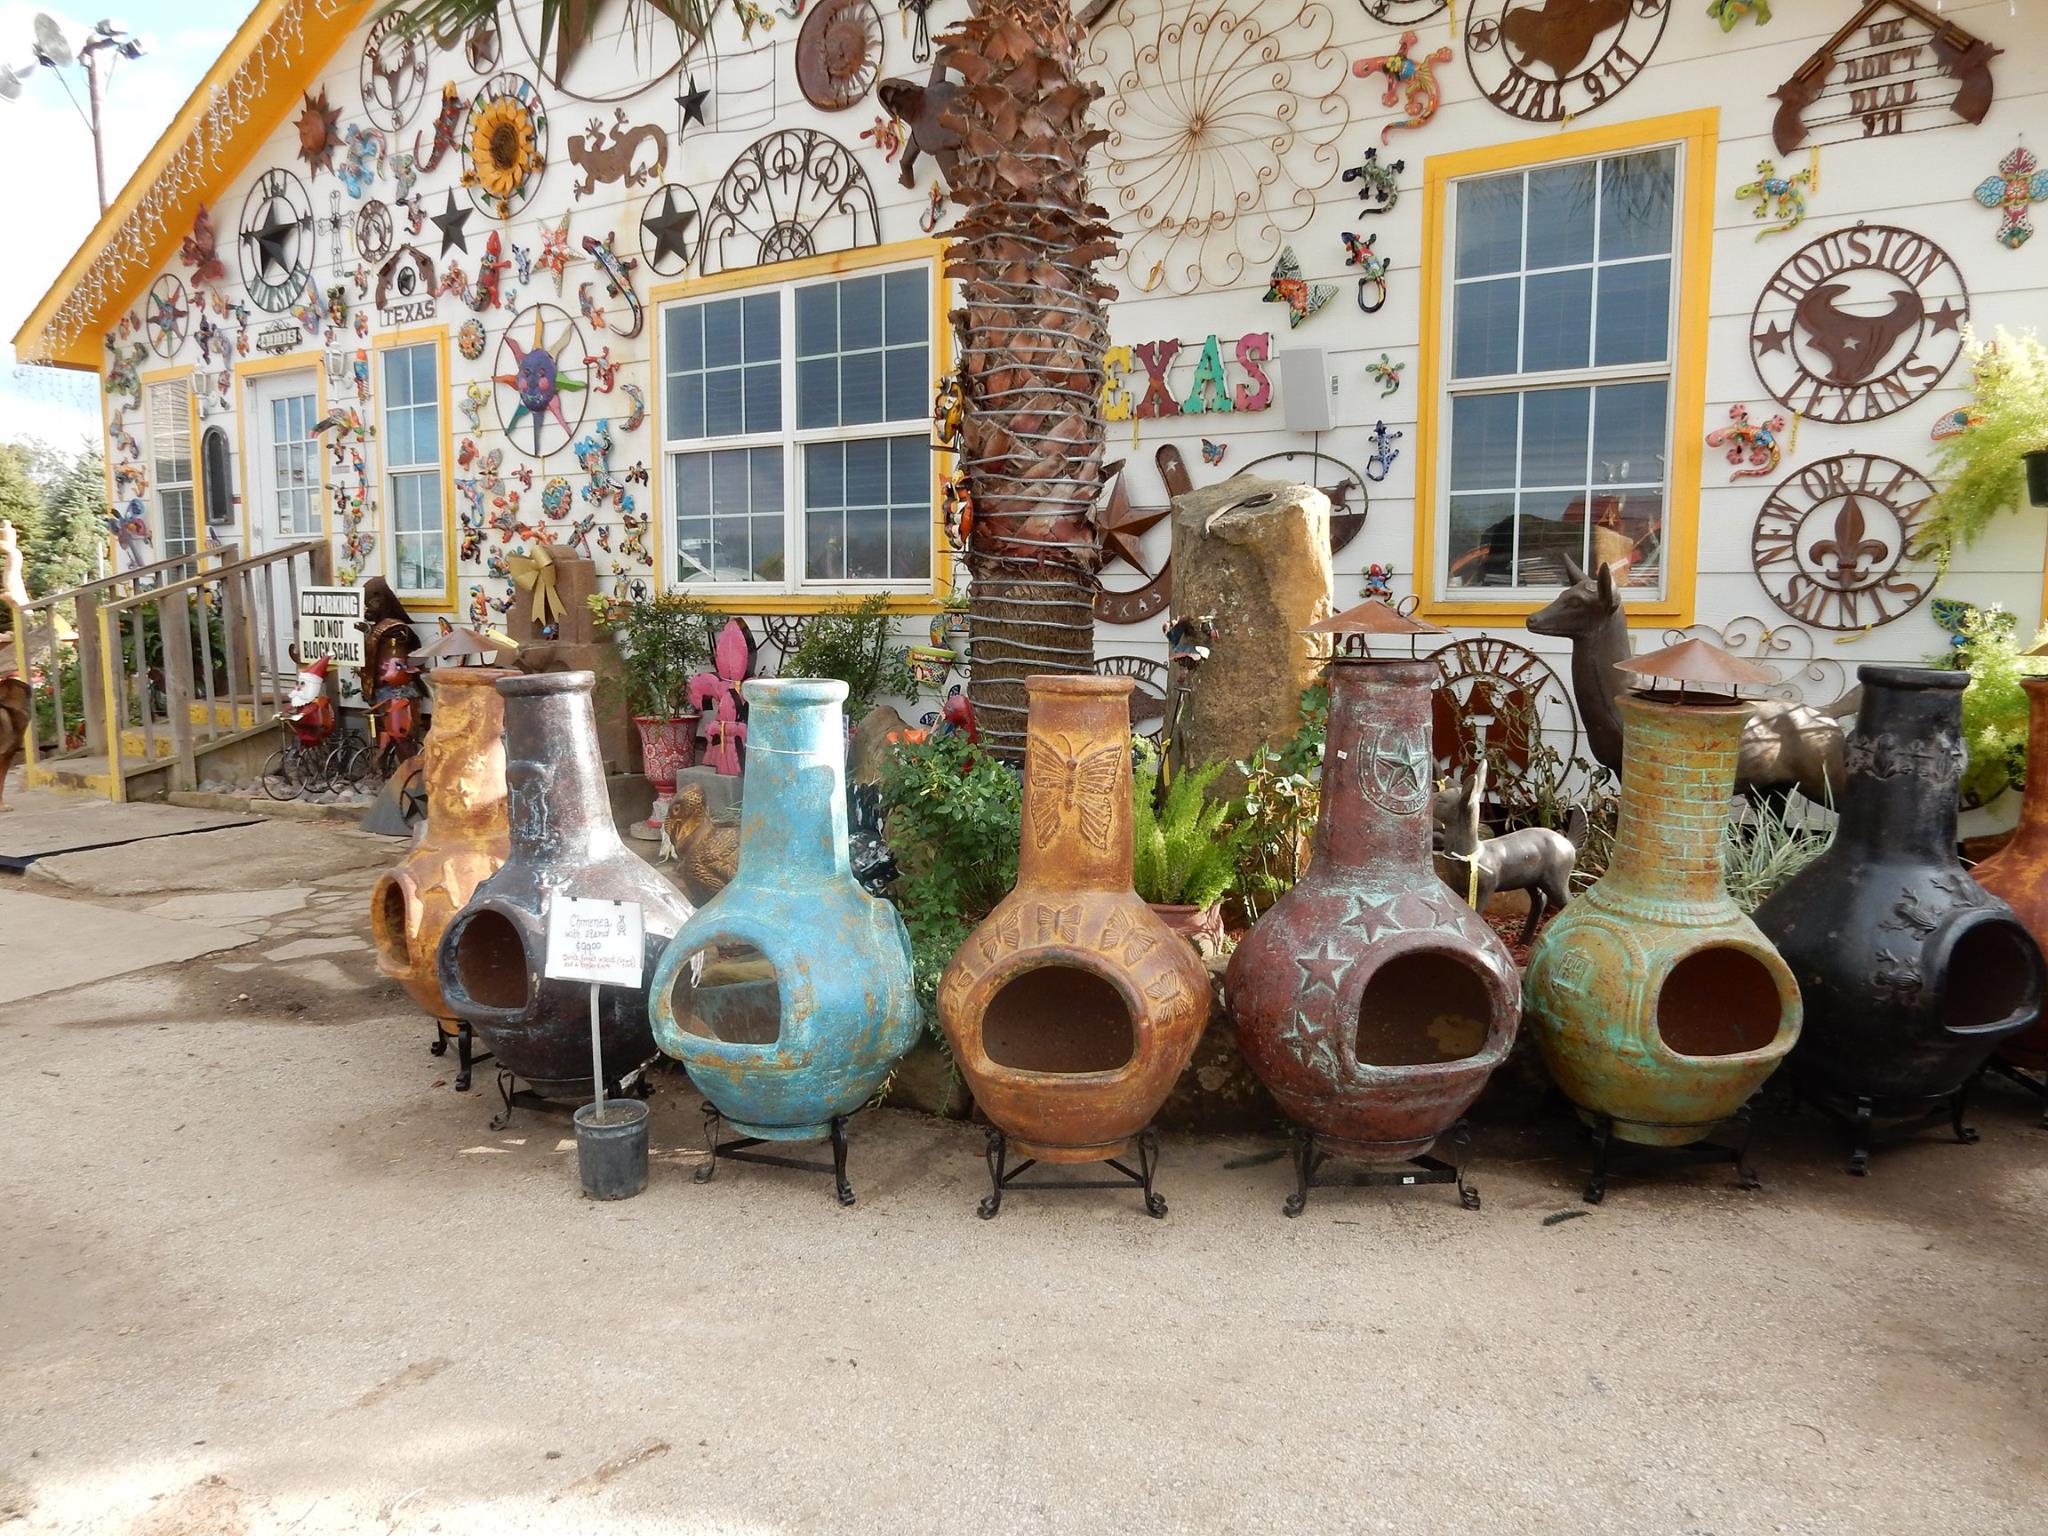 Yard decorations like pottery and metal decorations at J&J Nursery, Spring, TX.